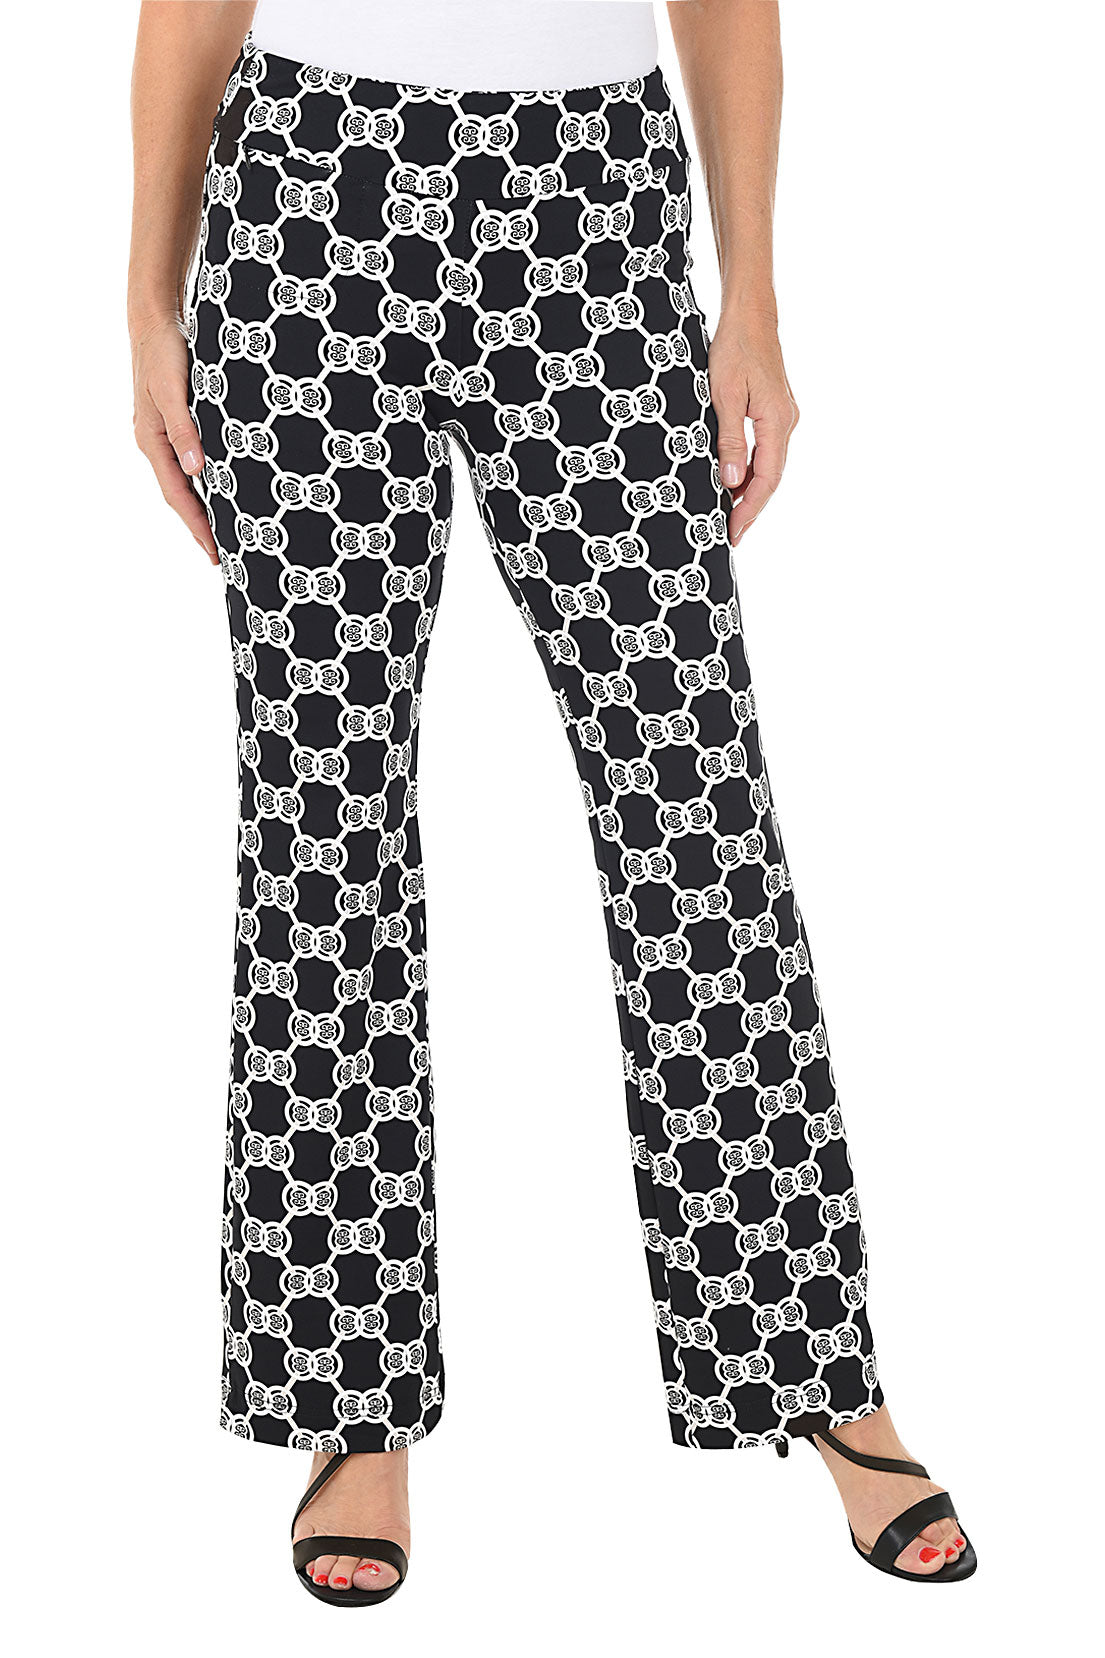 The Perfect Trouser Pant 32 - White